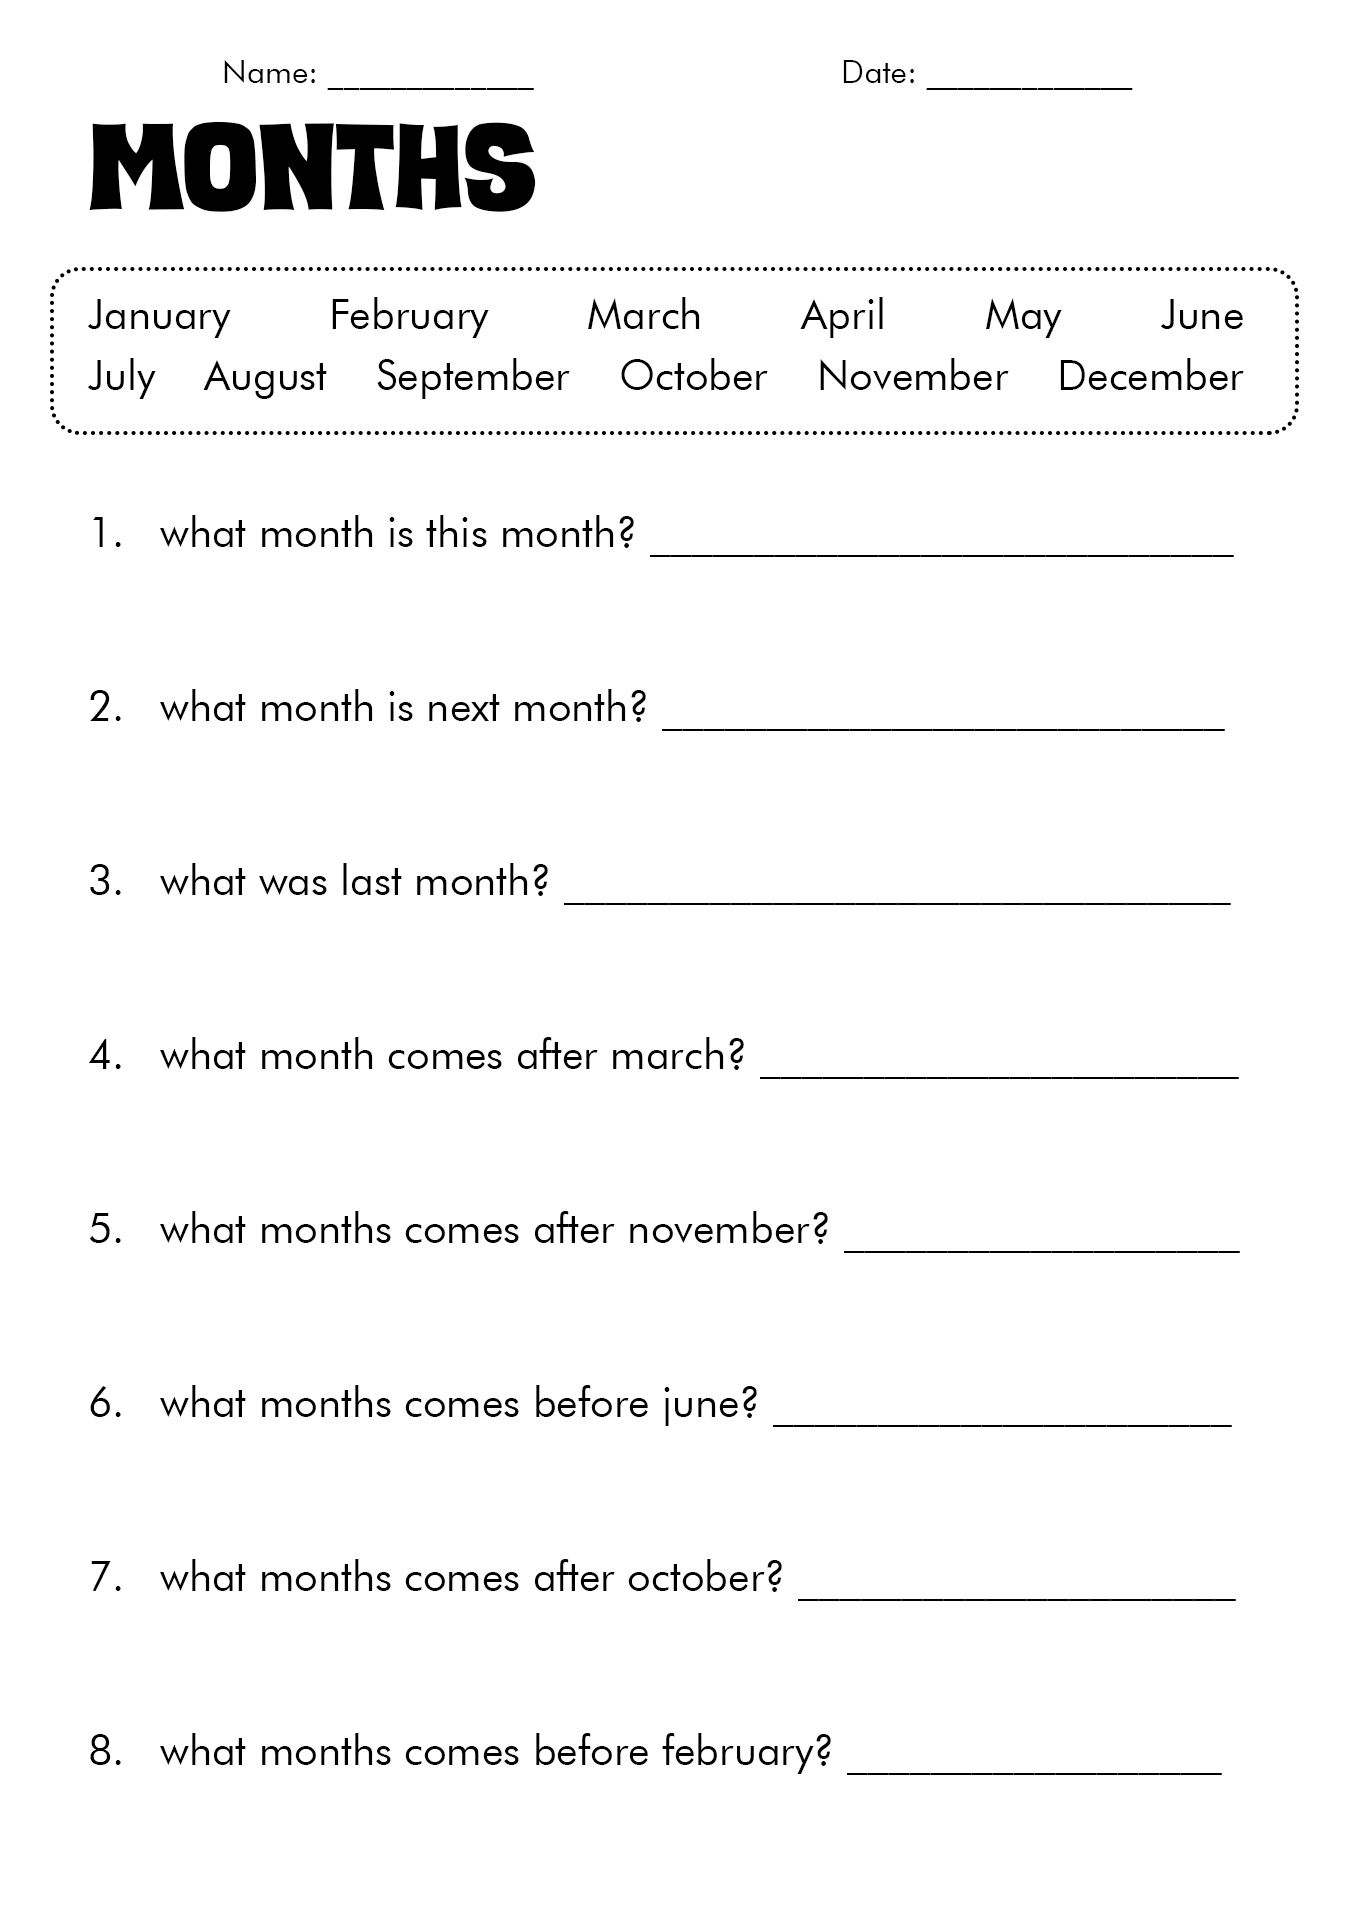 15 Best Images of Following Directions First Grade Worksheets - Ordinal